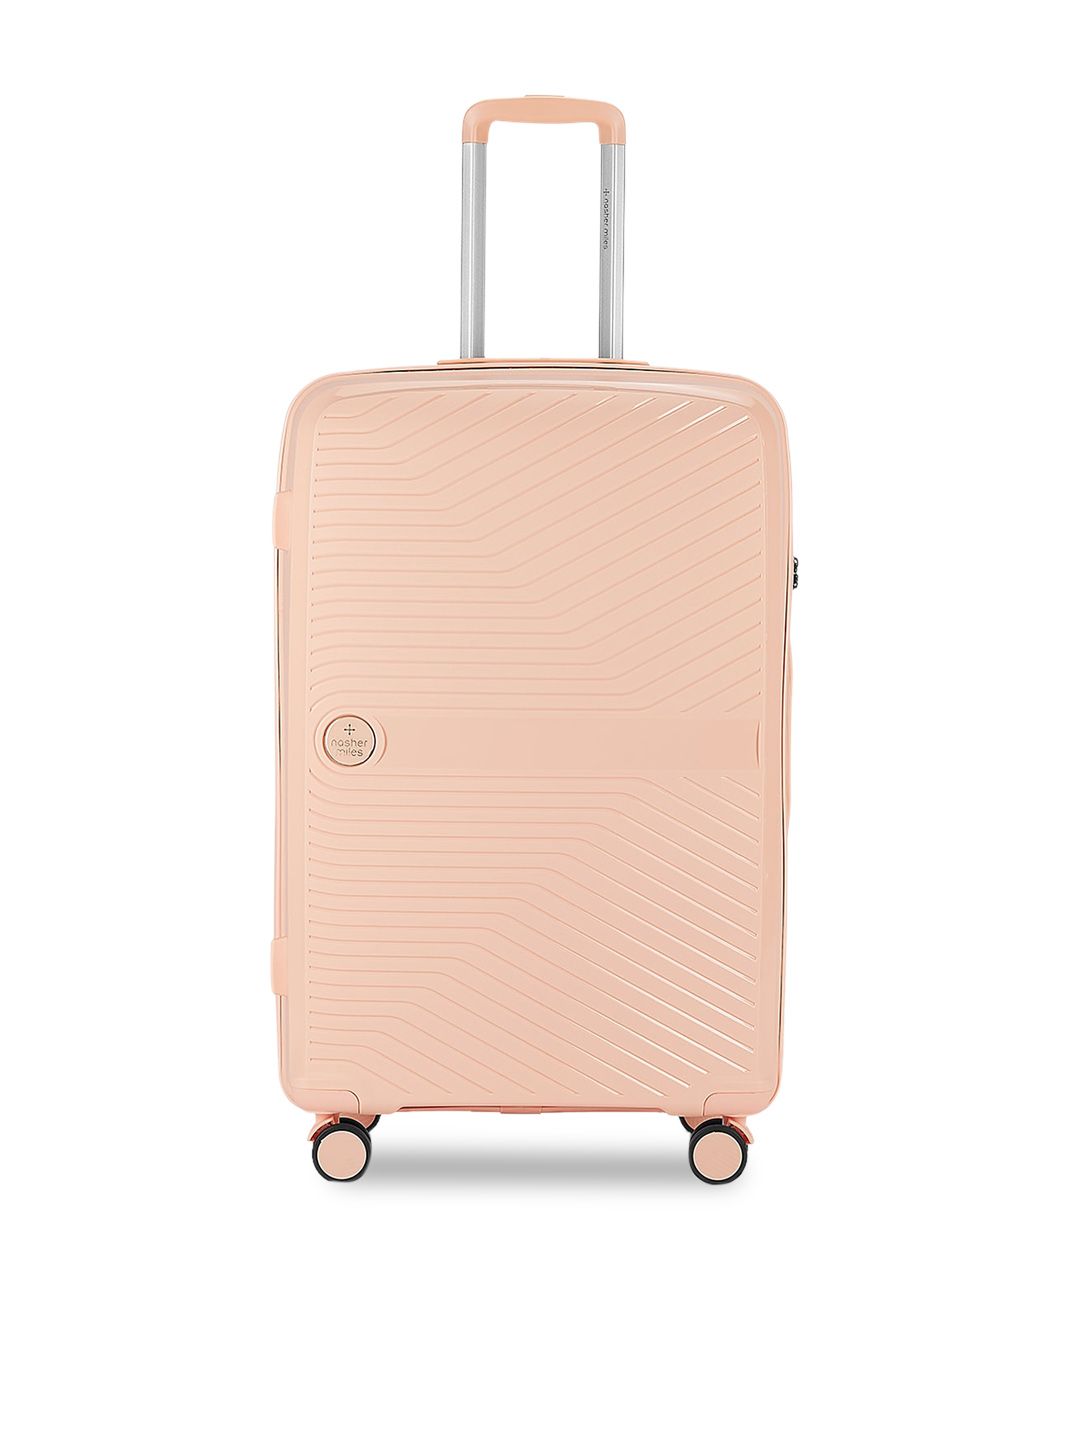 Nasher Miles Peach-Colored Hard Sided Large Trolley Suitcase Price in India